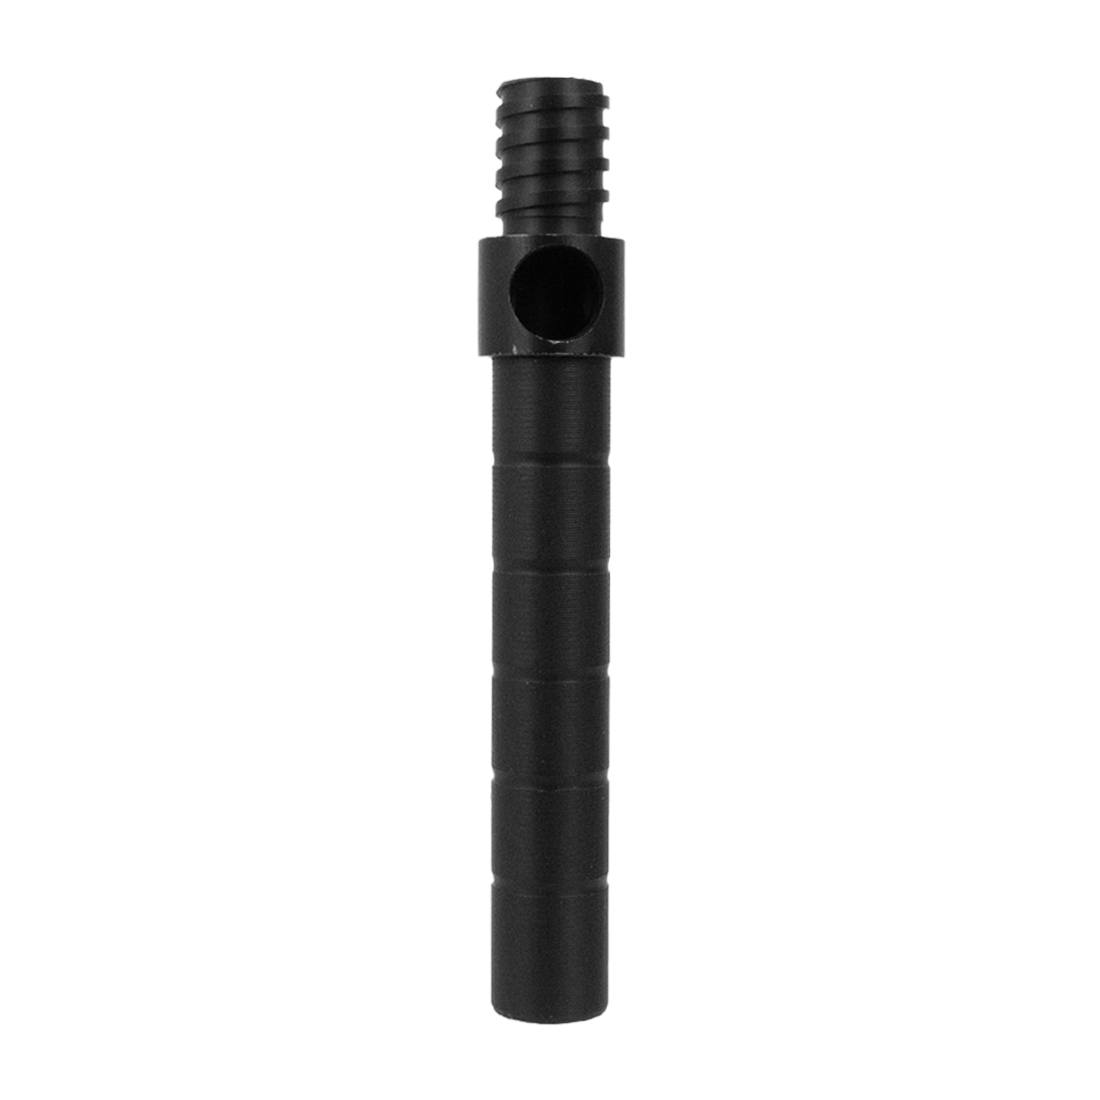 Pure Water Power Aluminum Pole Tip - Acme Front View